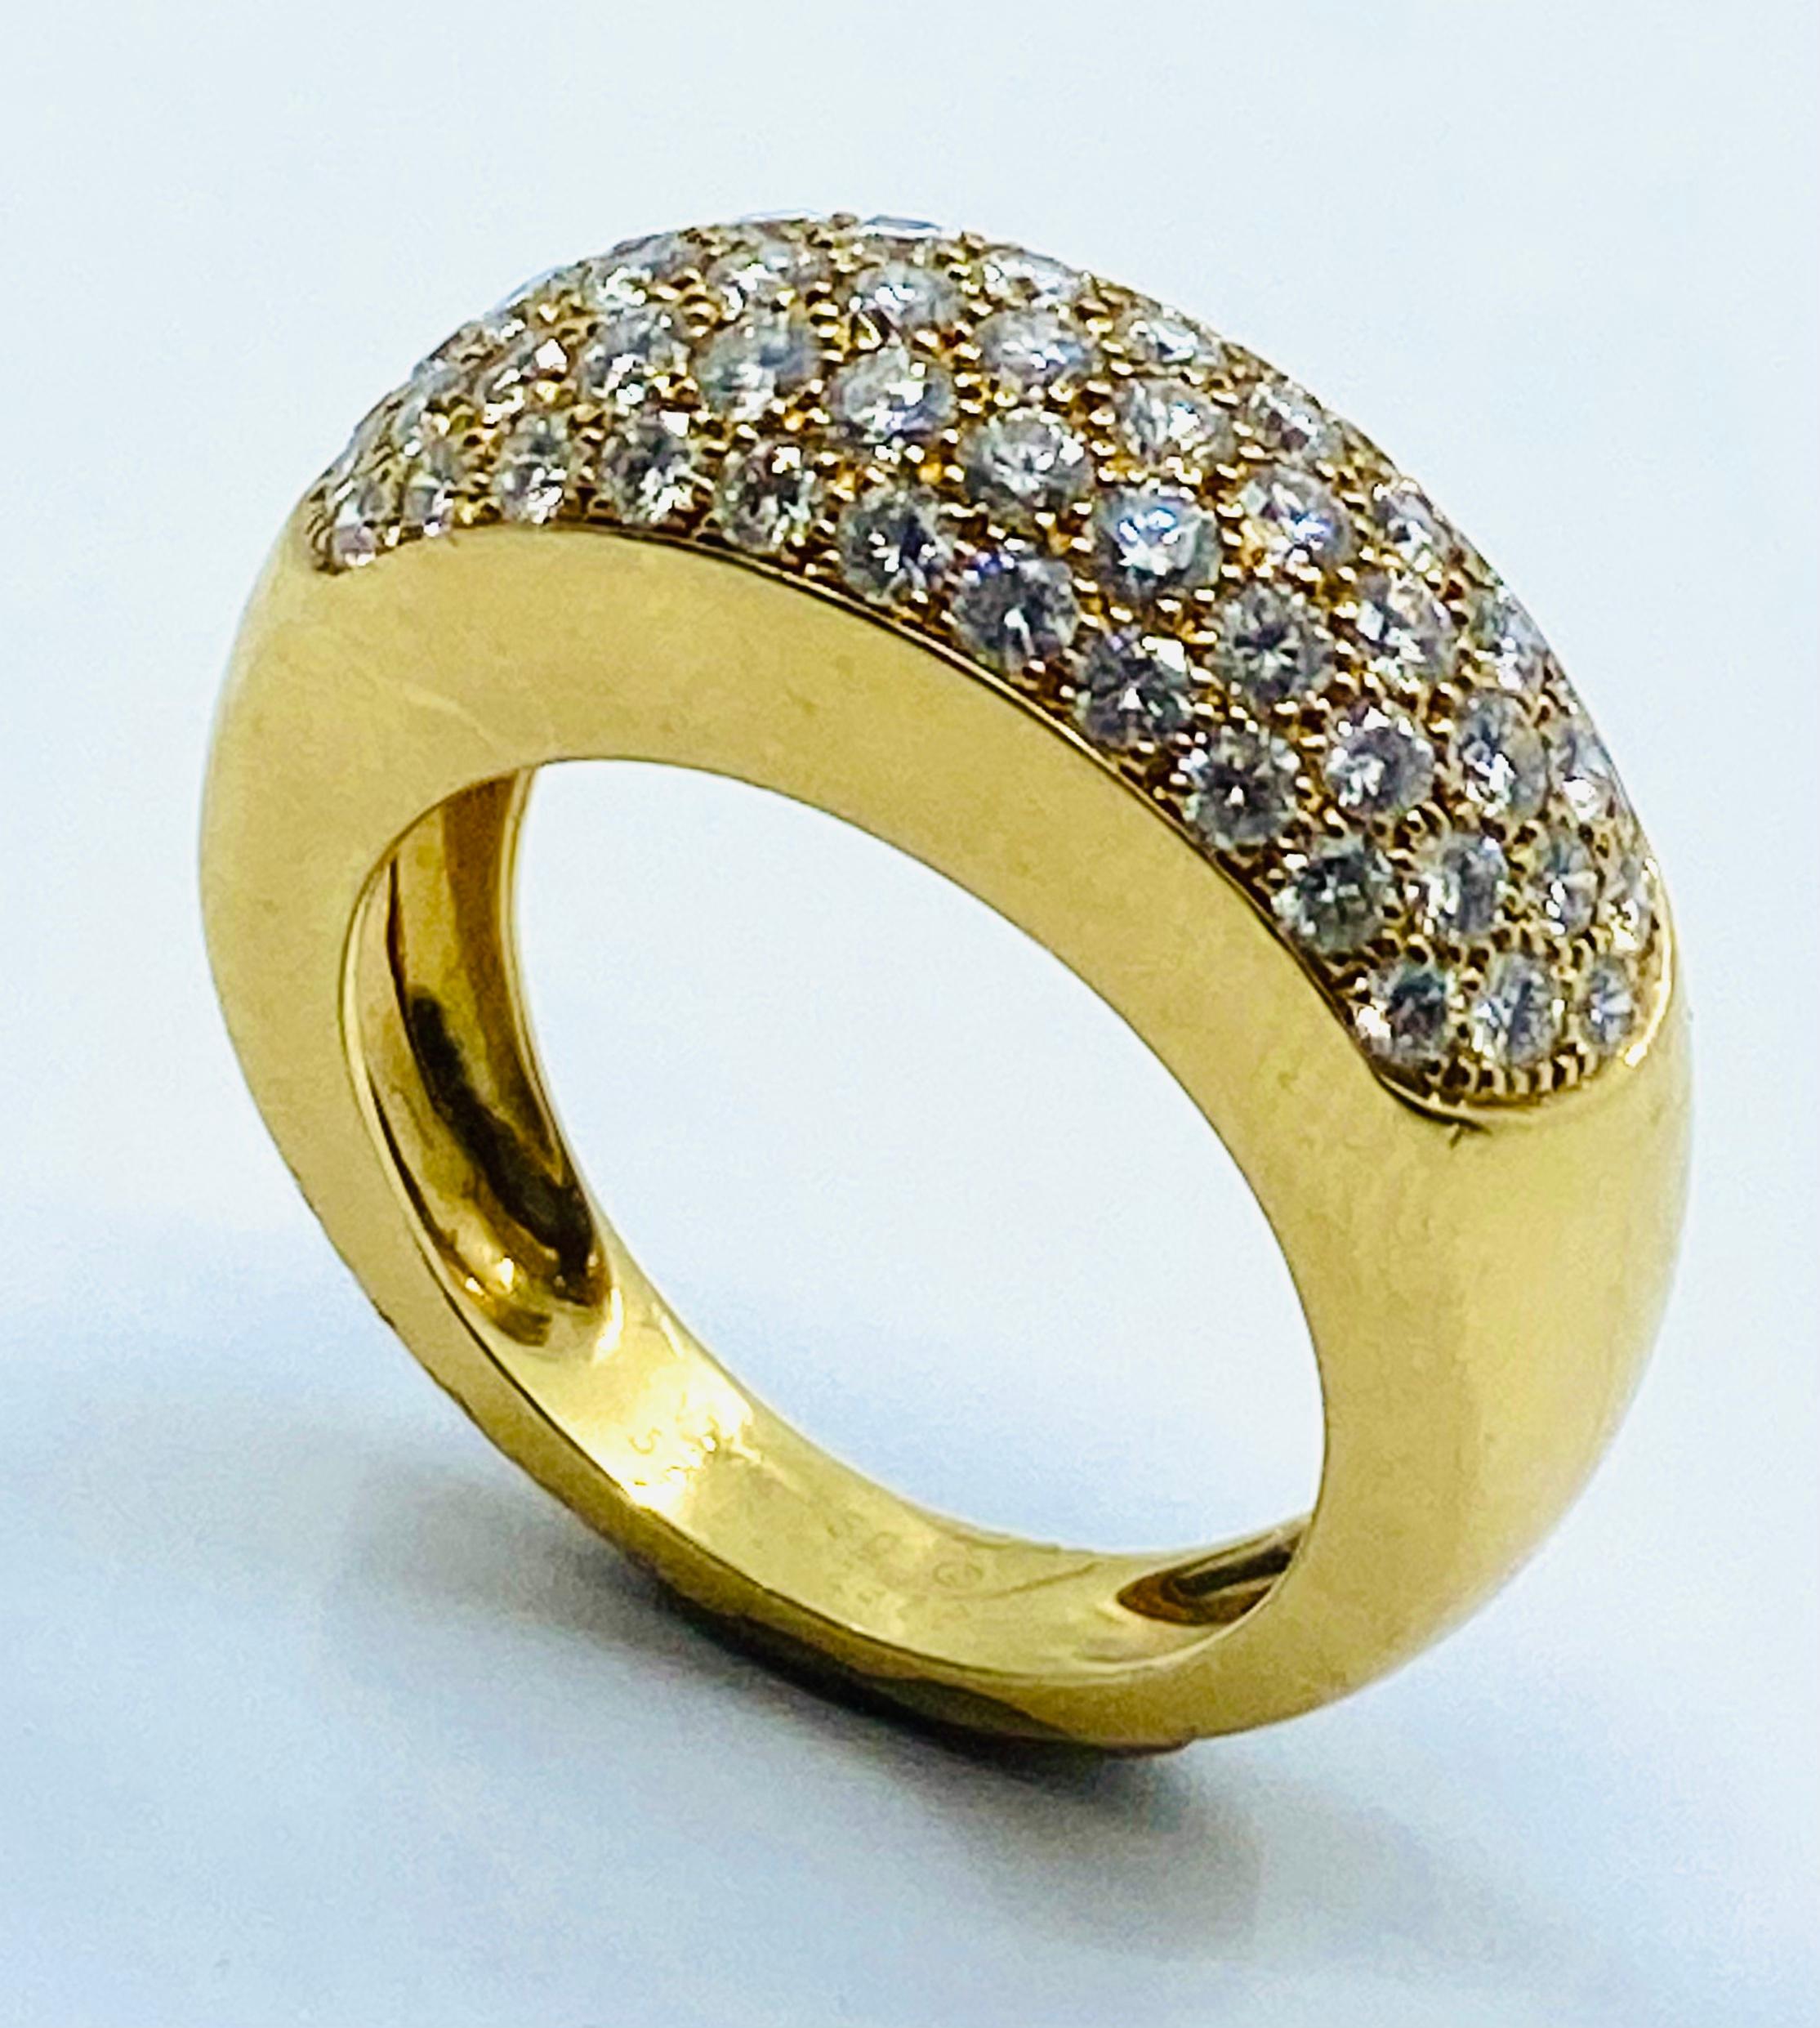 Van Cleef & Arpels Pave Diamond Gold Dome Ring For Sale 3